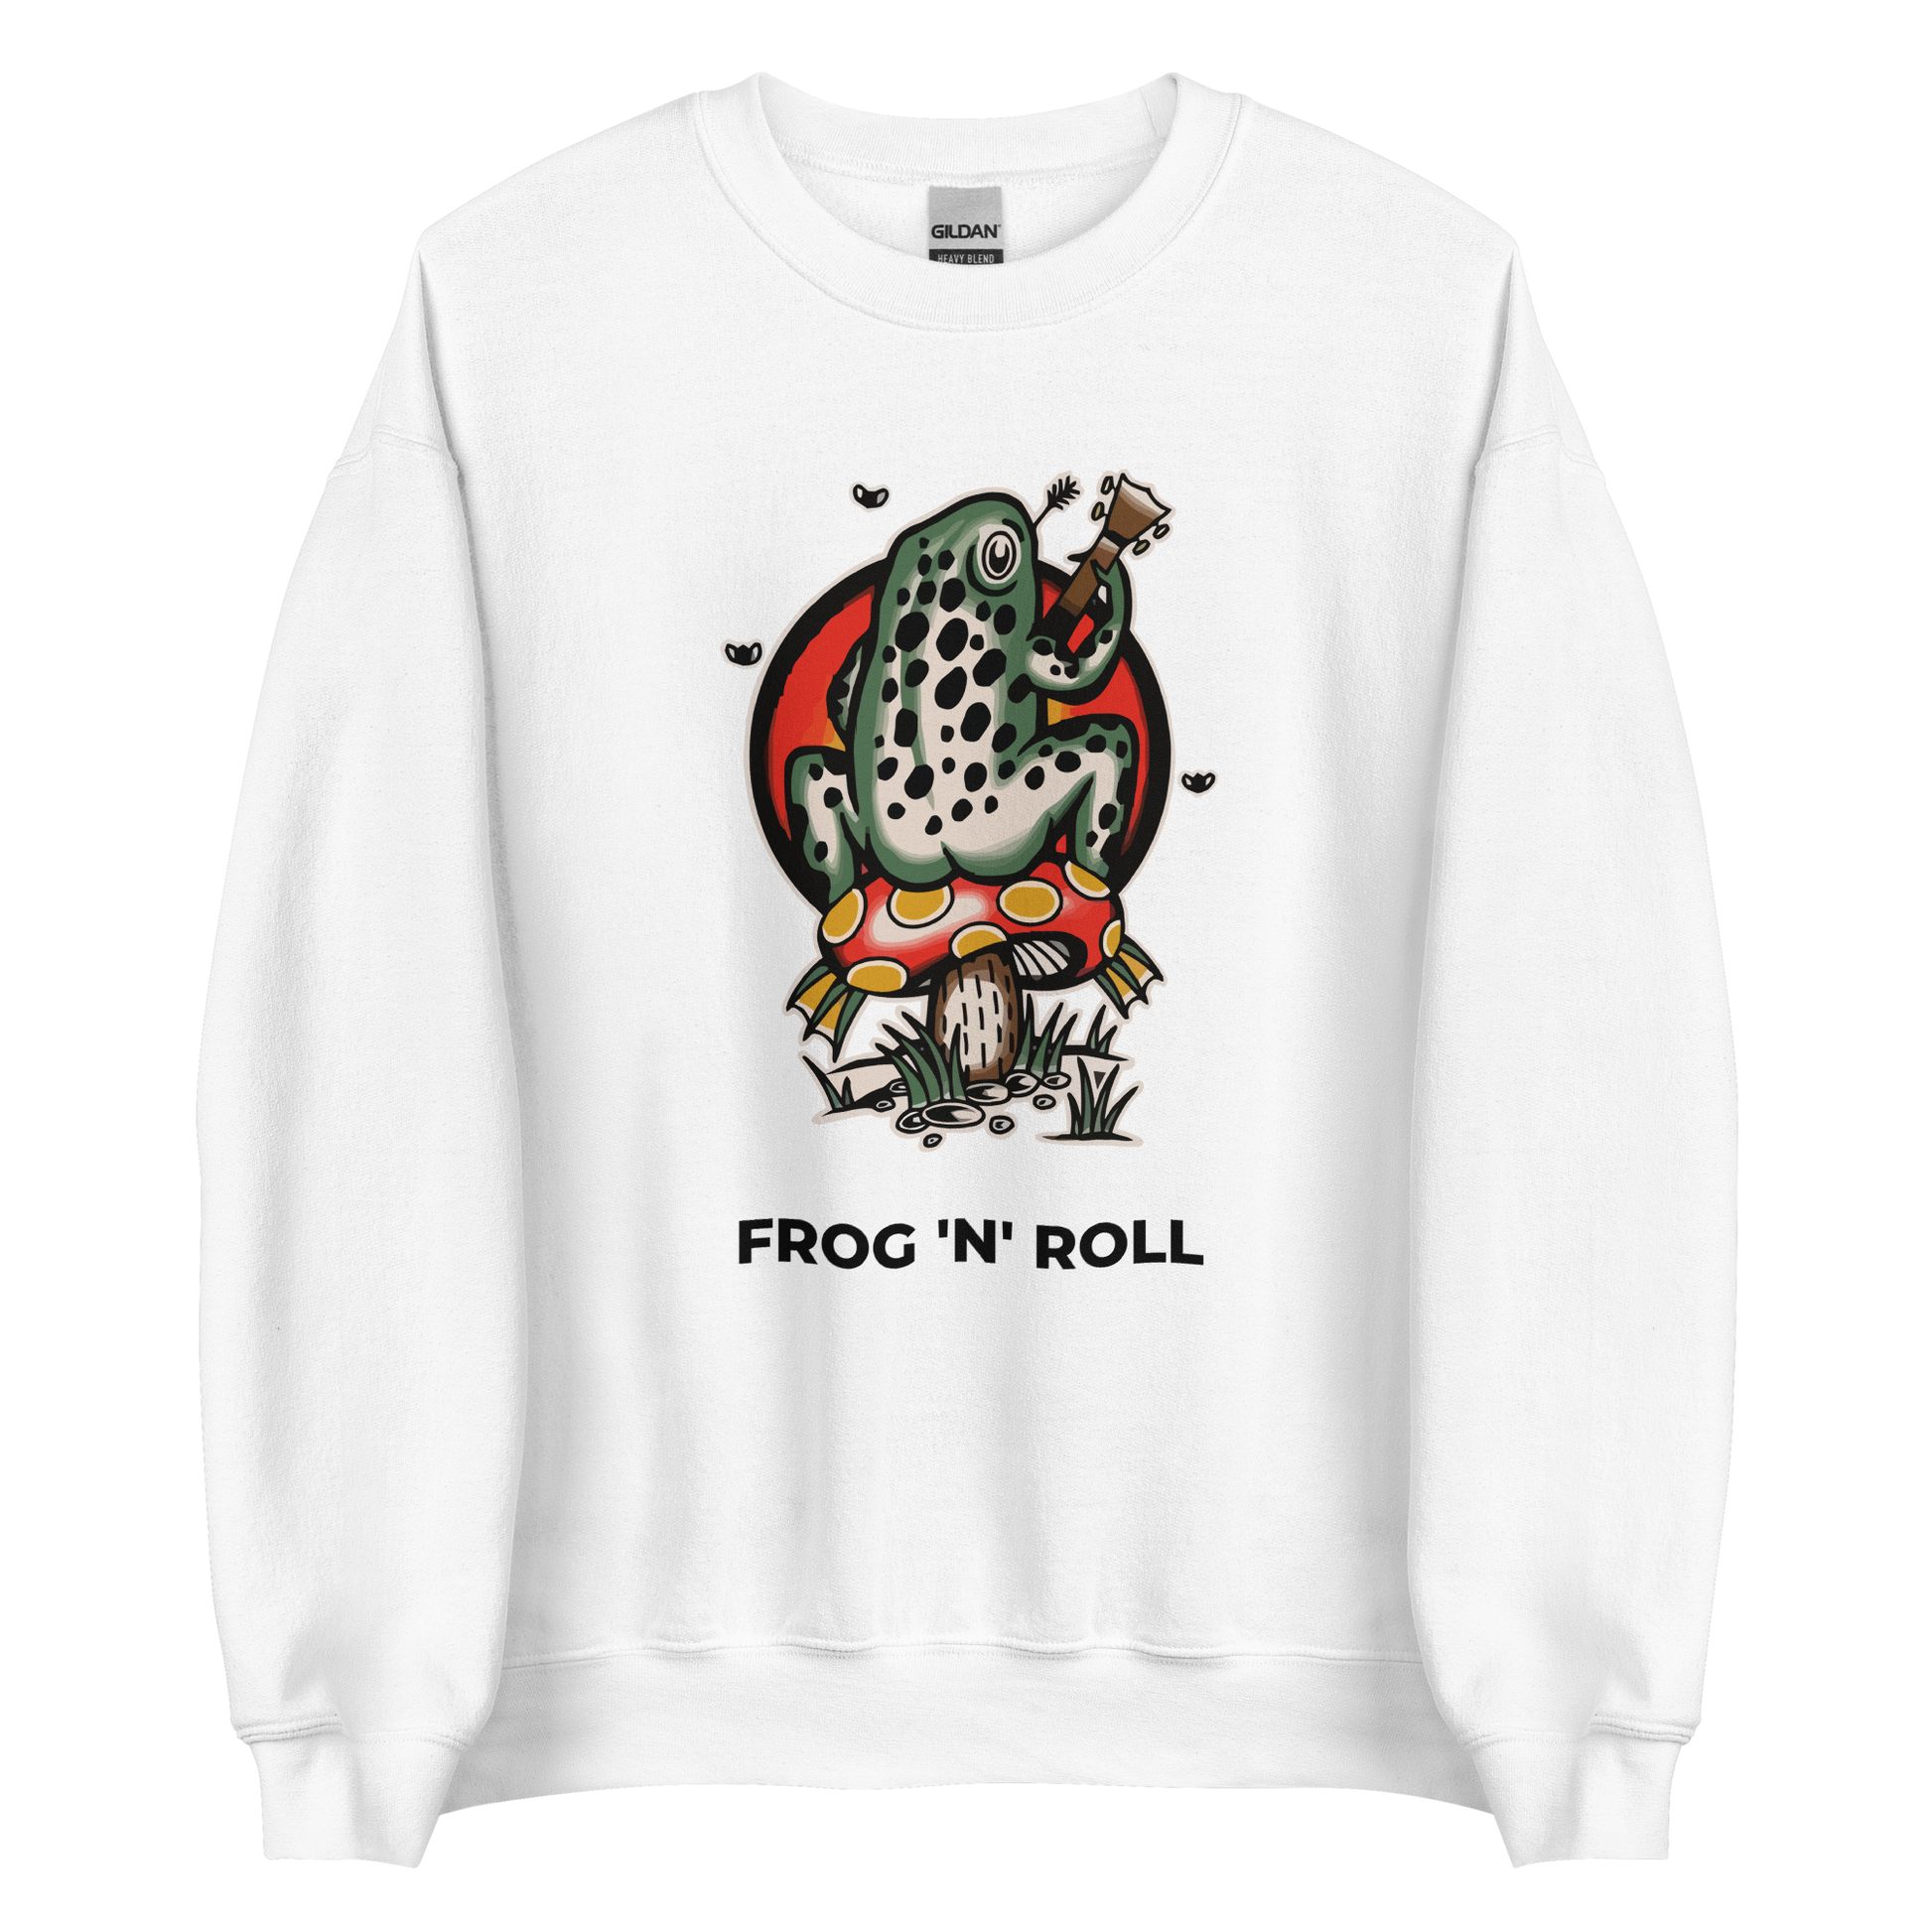 White Frog Sweatshirt featuring the hilarious Frog 'n' Roll graphic on the chest - Funny Graphic Frog Sweatshirts - Boozy Fox